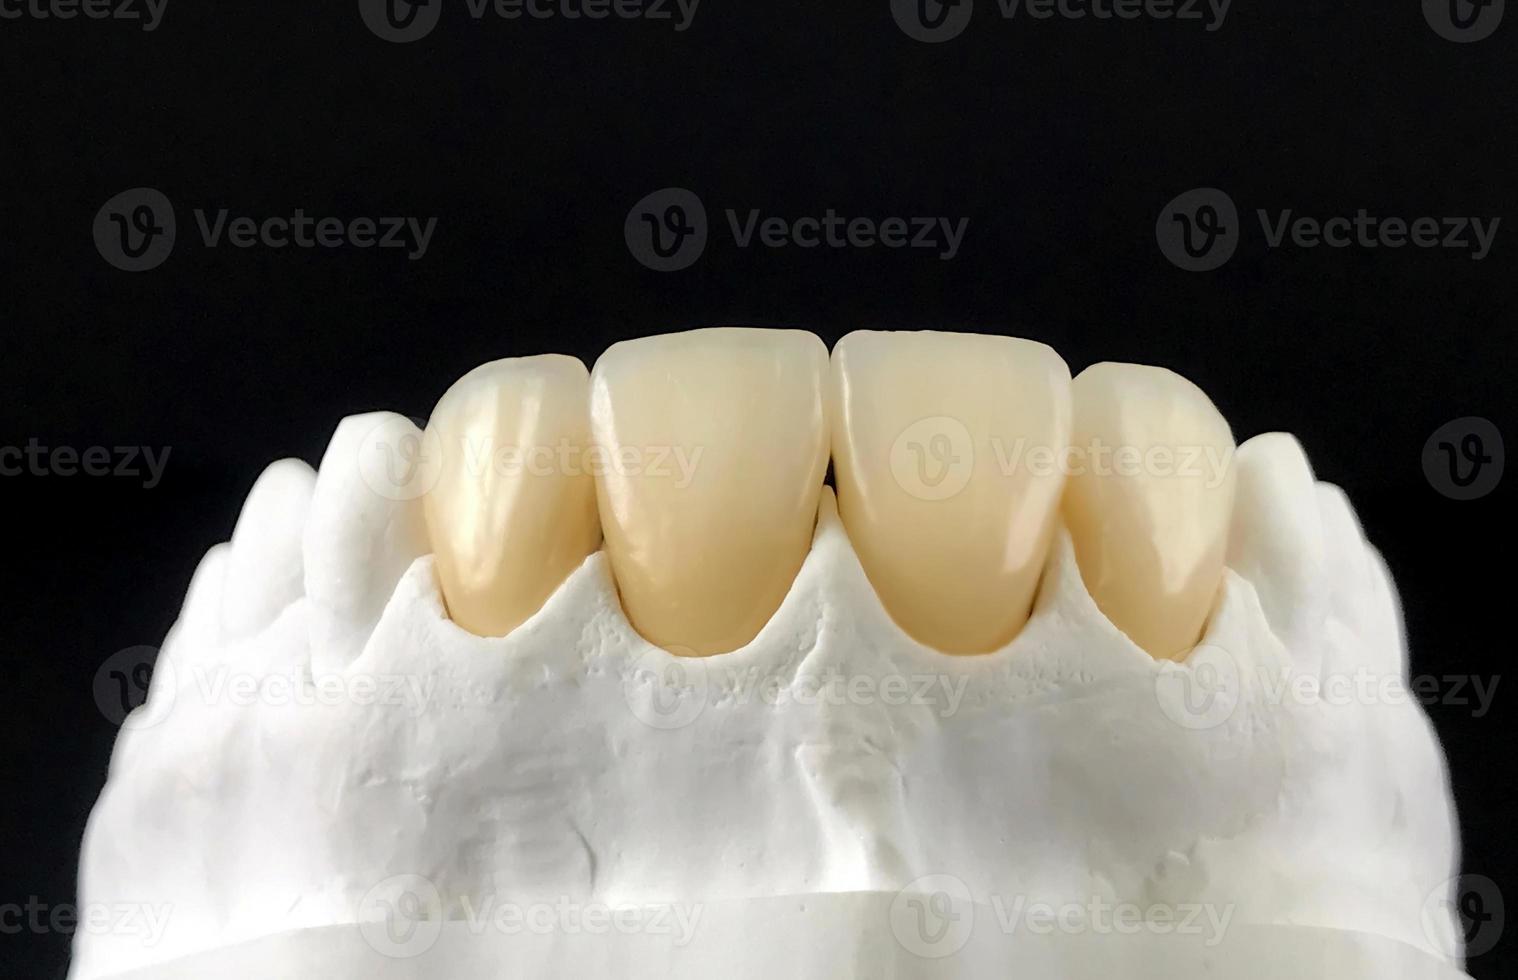 Dental veneers and crowns in the plaster model for treatment and new smile. Zirconia crowns with full porcelain. Dental Prosthetic laboratory. Ceramic teeth - Dental technician work photo